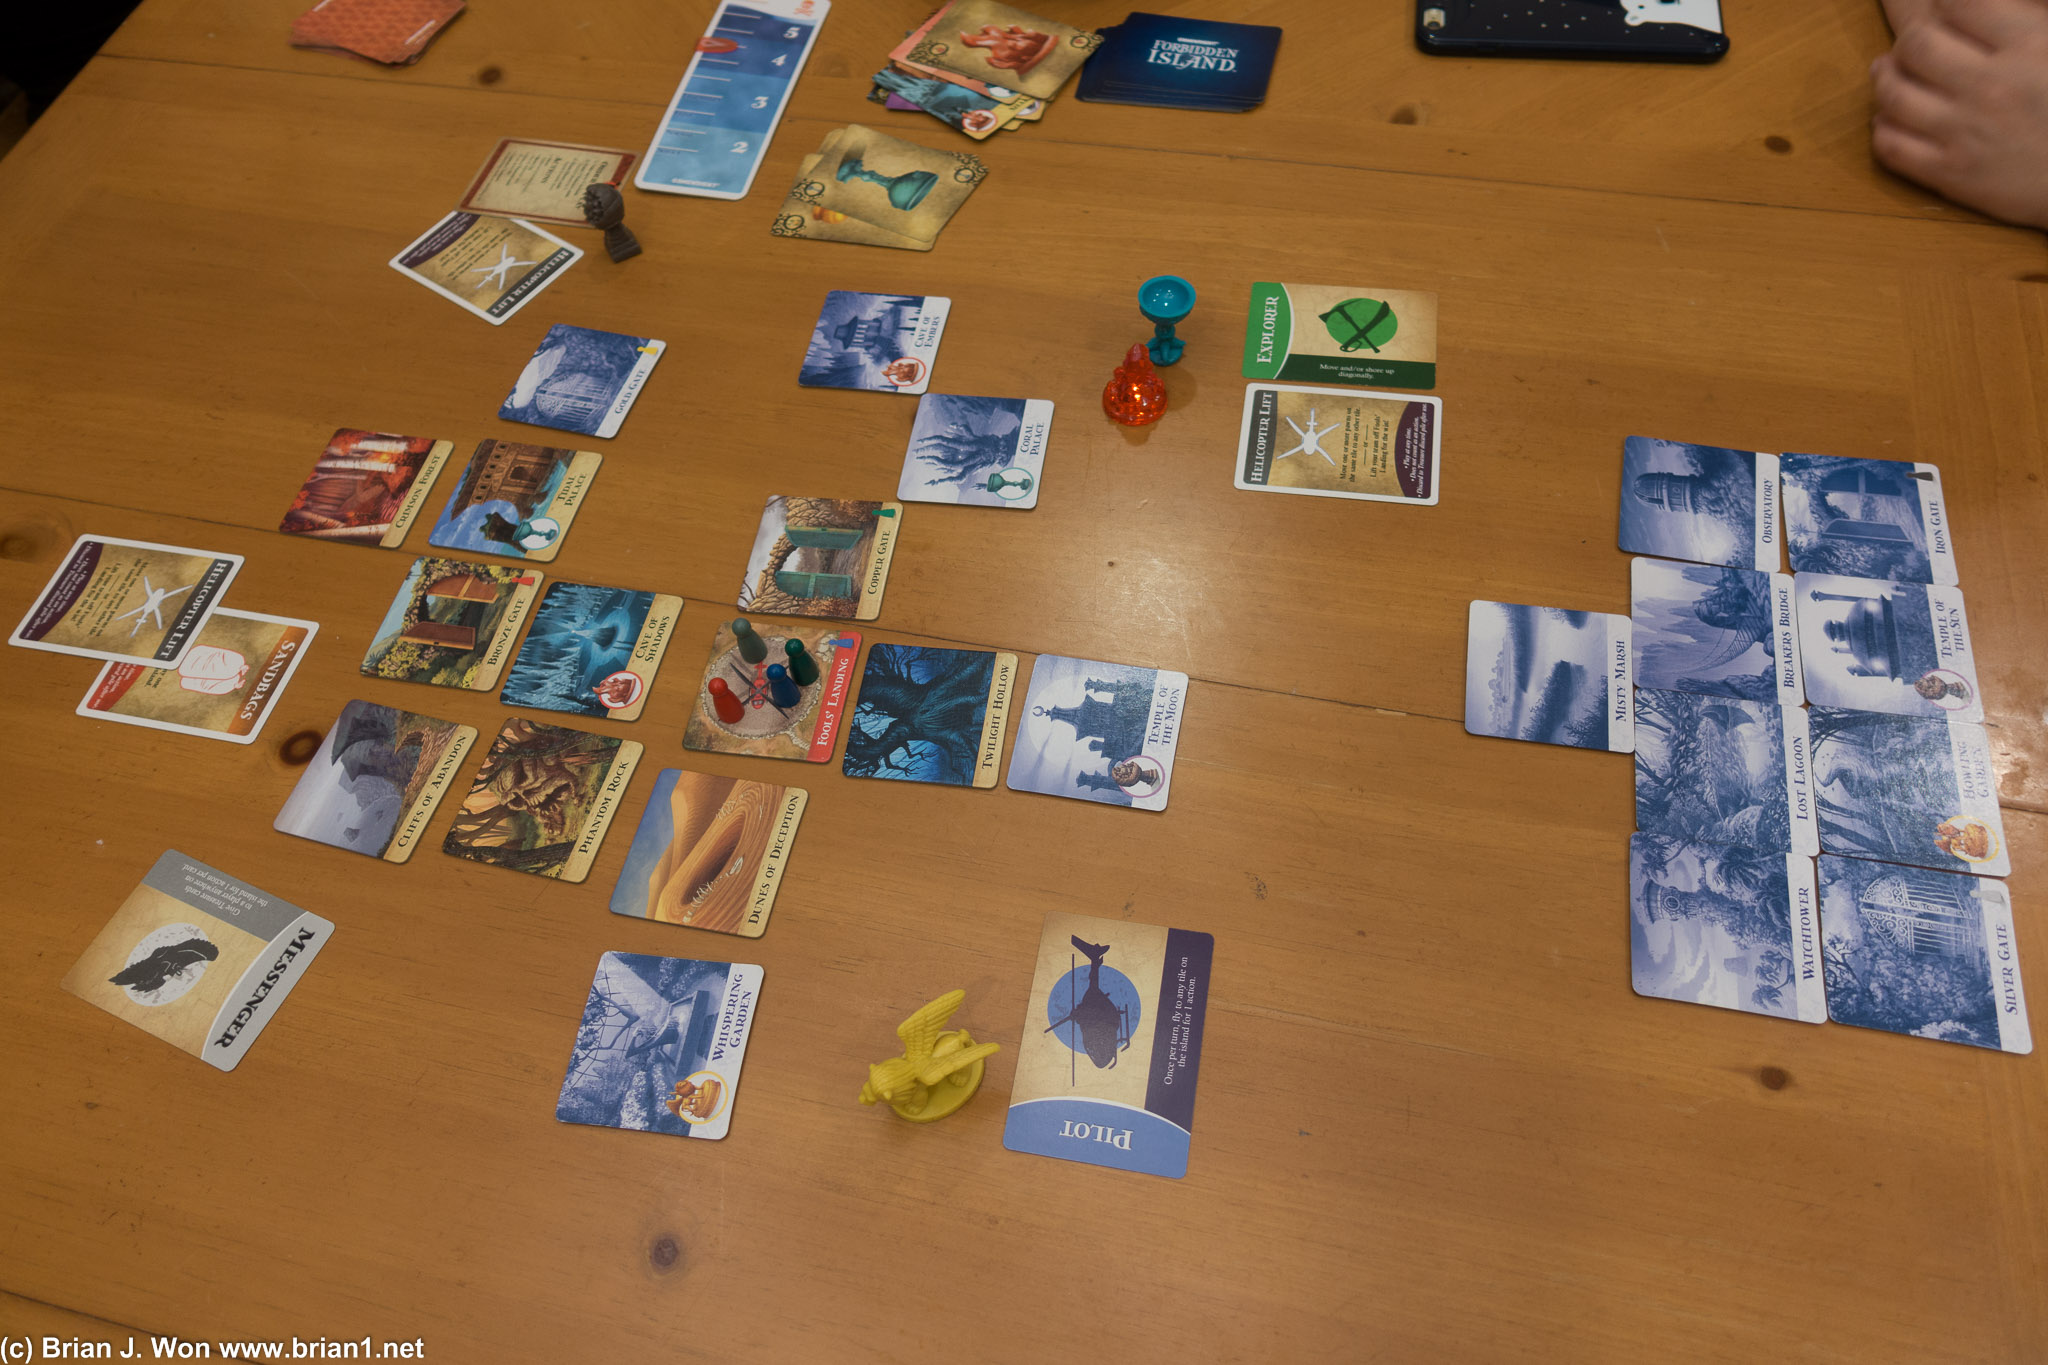 Of course we lucked out on the Waters Rise placement and the tiles we lost-- luck is a huge factor!